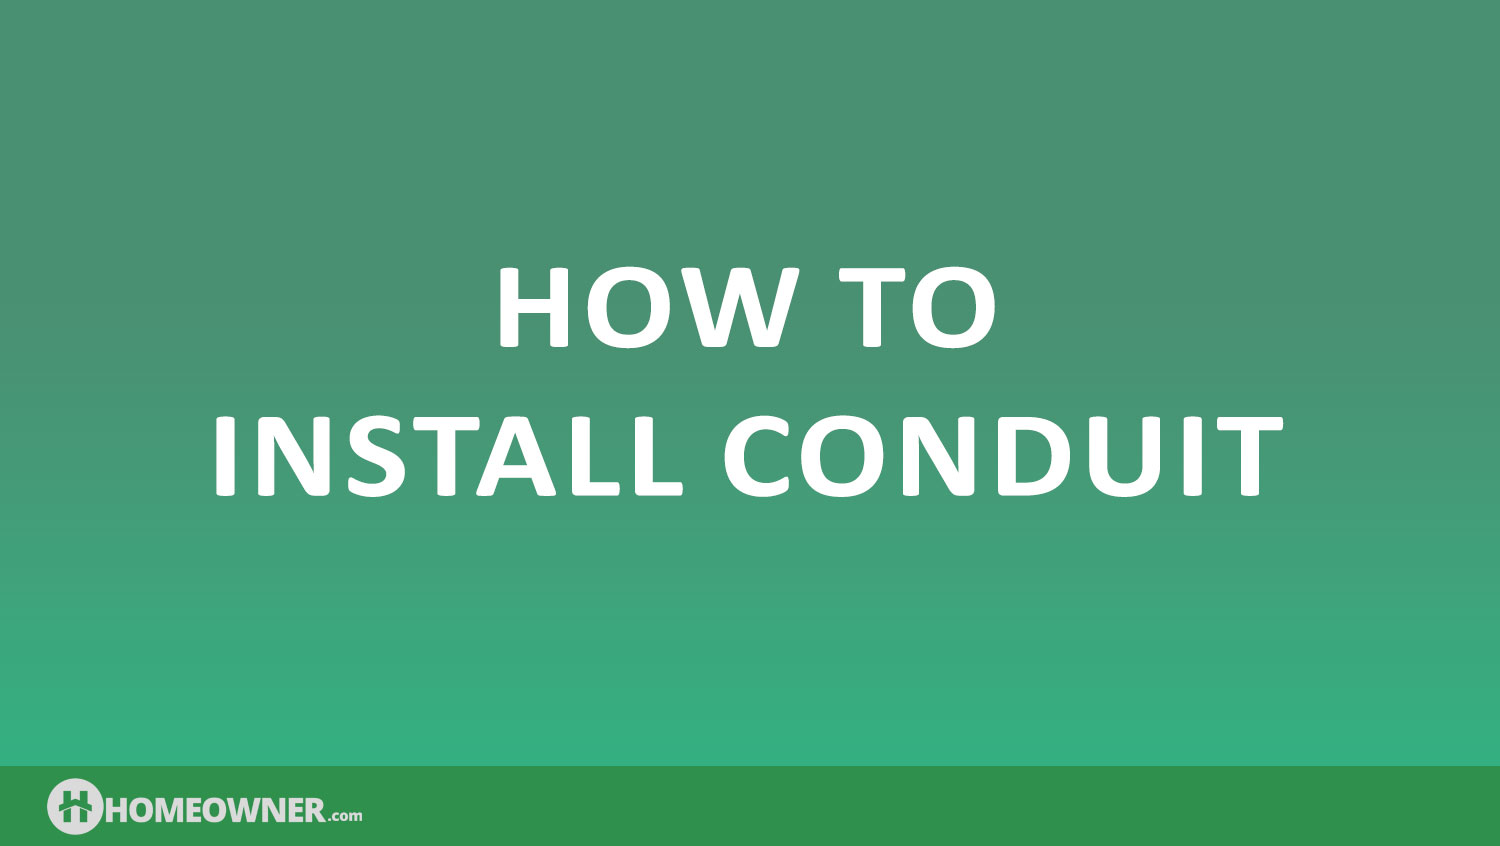 How To Install Conduit